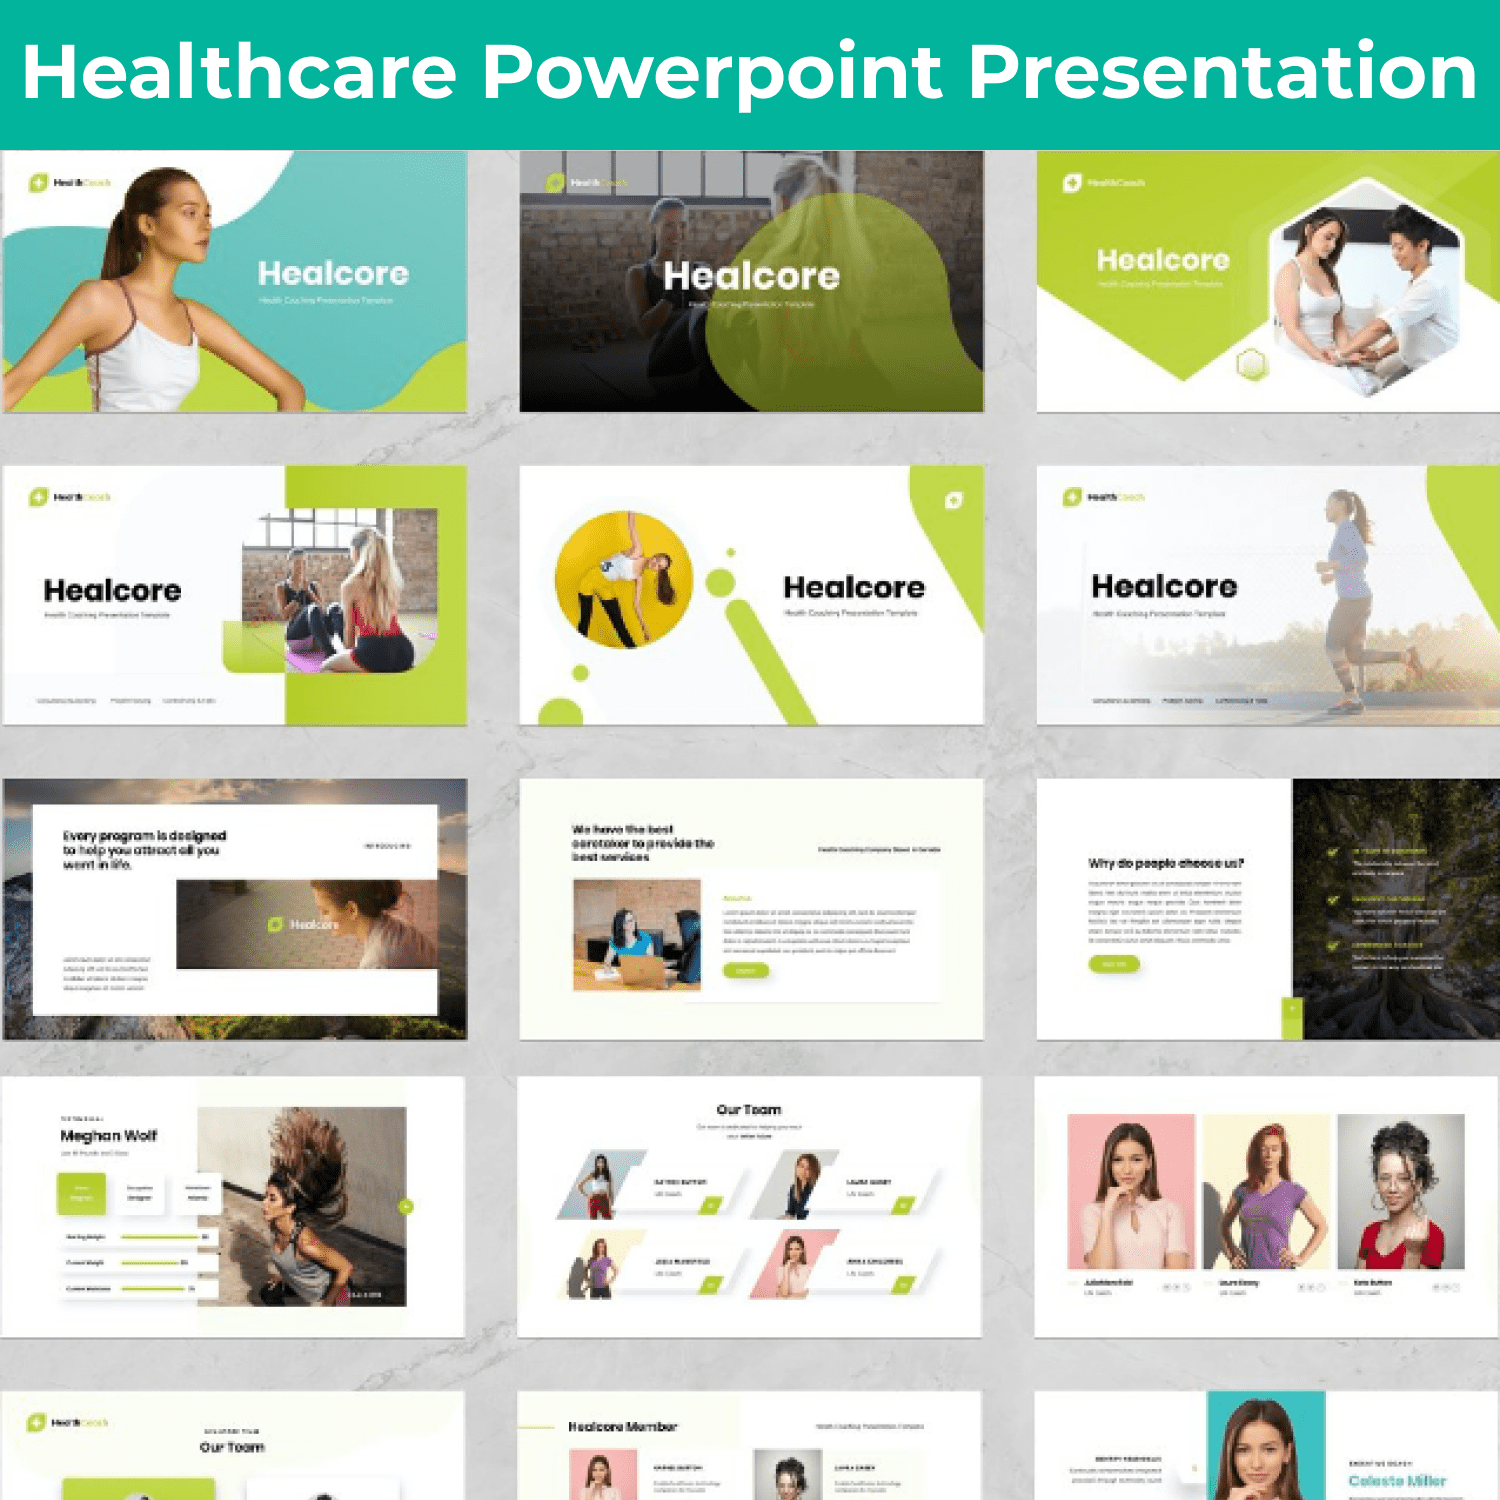 Healthcare Powerpoint Presentation main cover.